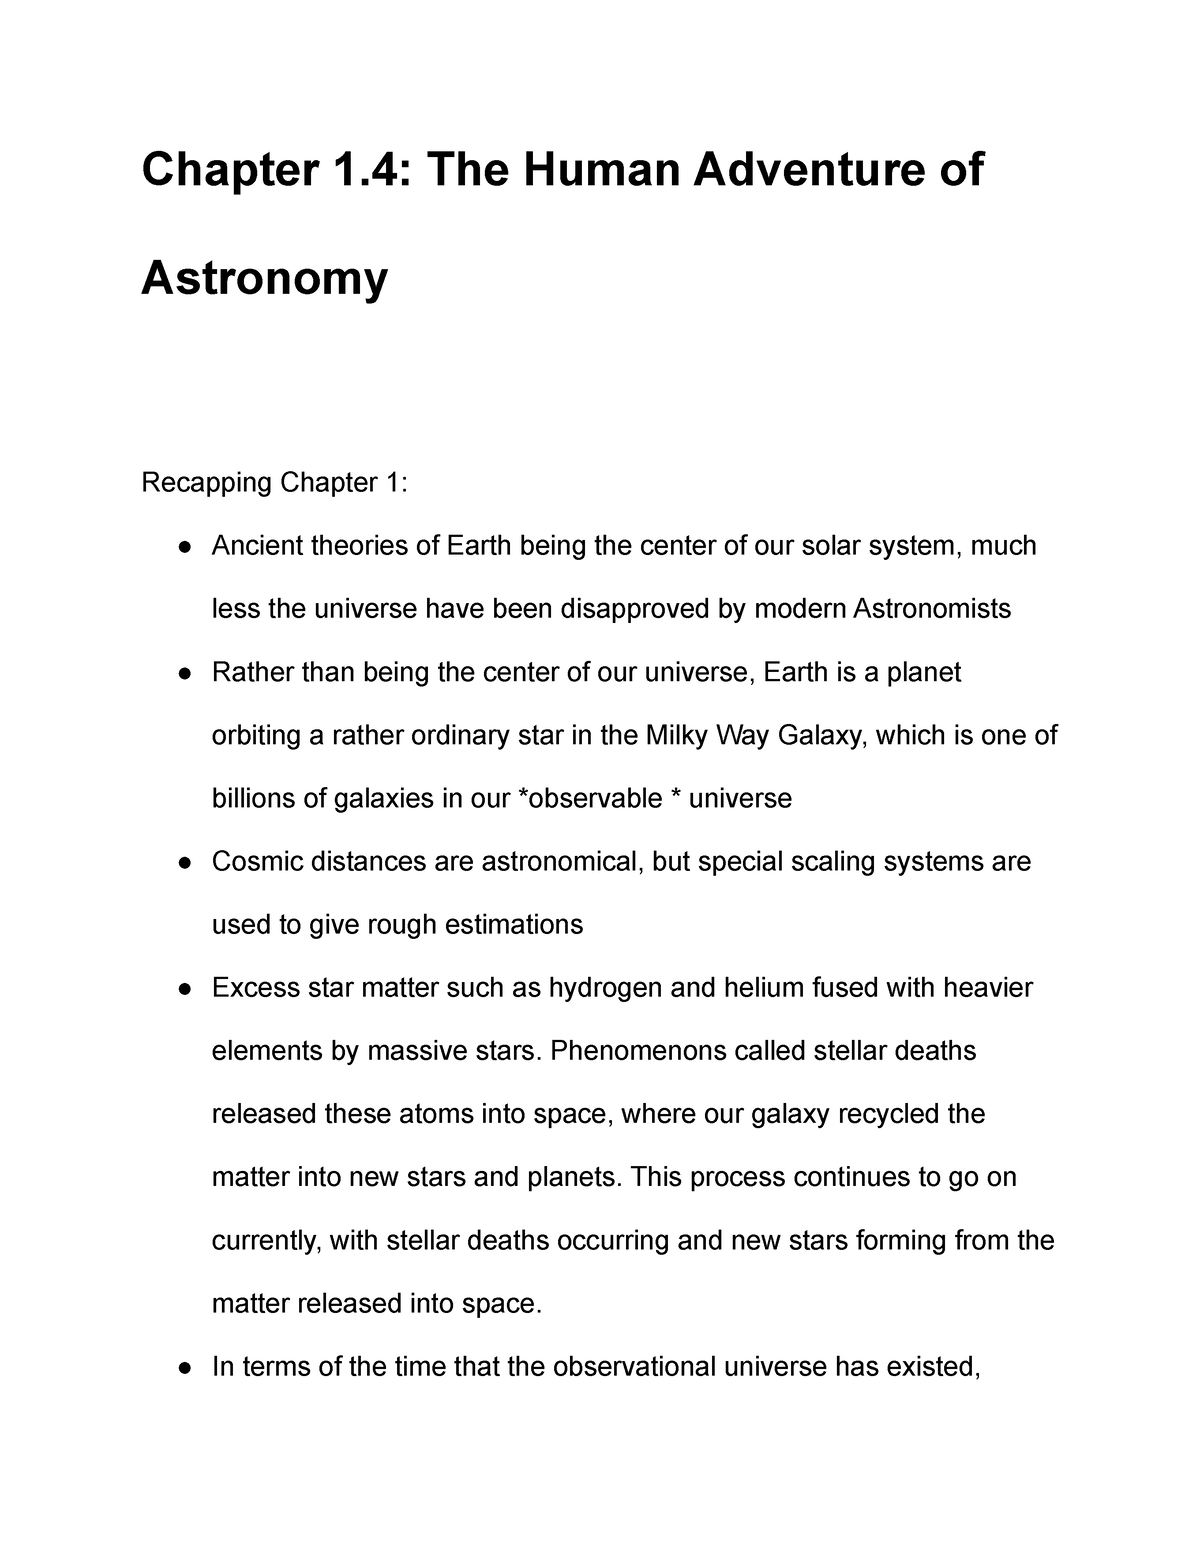 Phys 202 Chapter 14 Notes Chapter 1 The Human Adventure Of Astronomy Recapping Chapter 1 9314